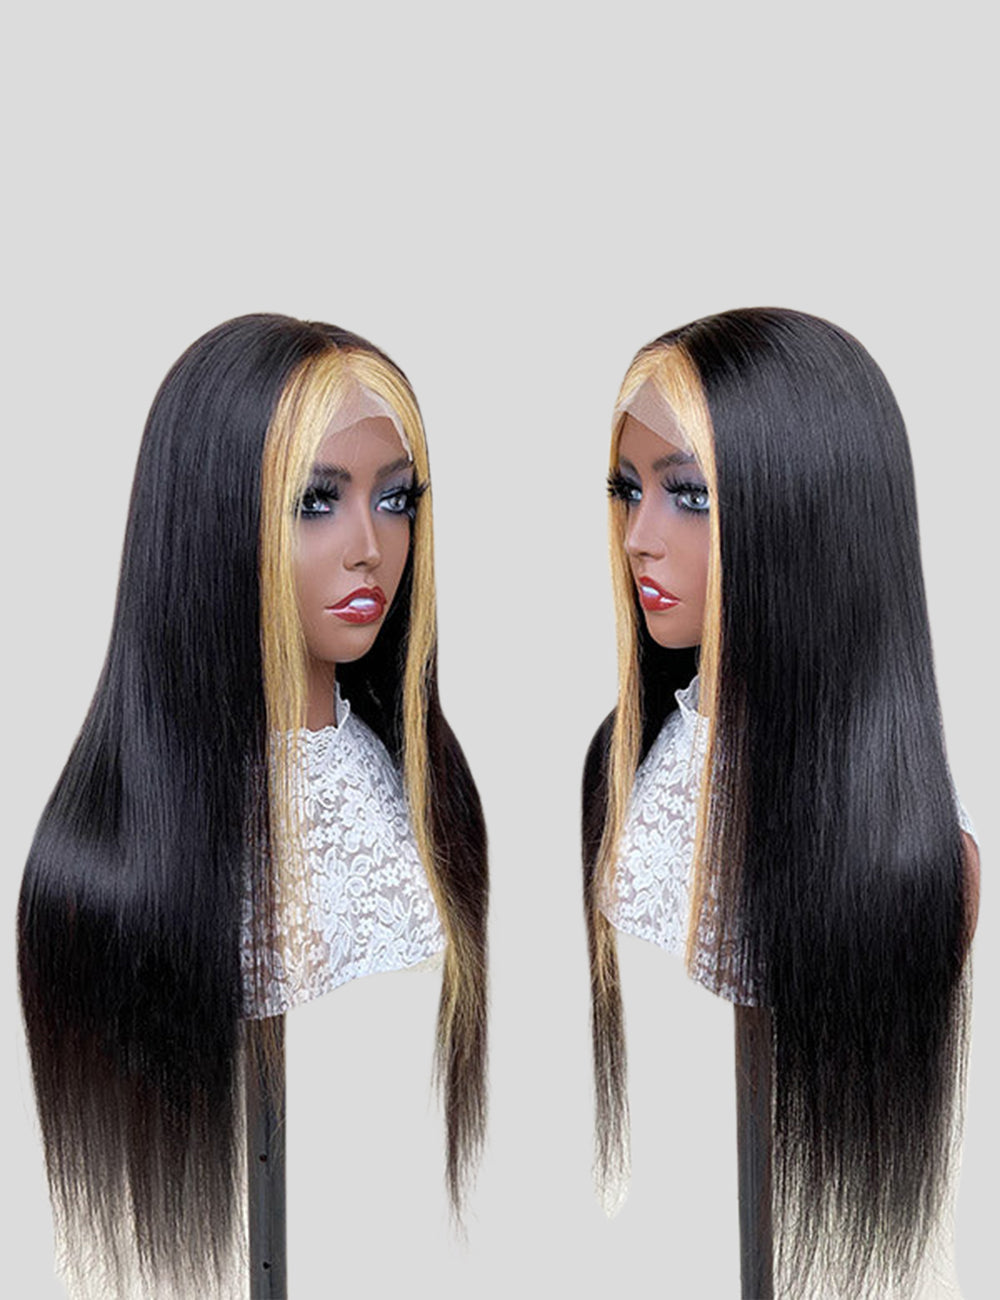 Skunk Stripe Wig HD Lace Front Wigs Highlight Straight Human Hair Wigs